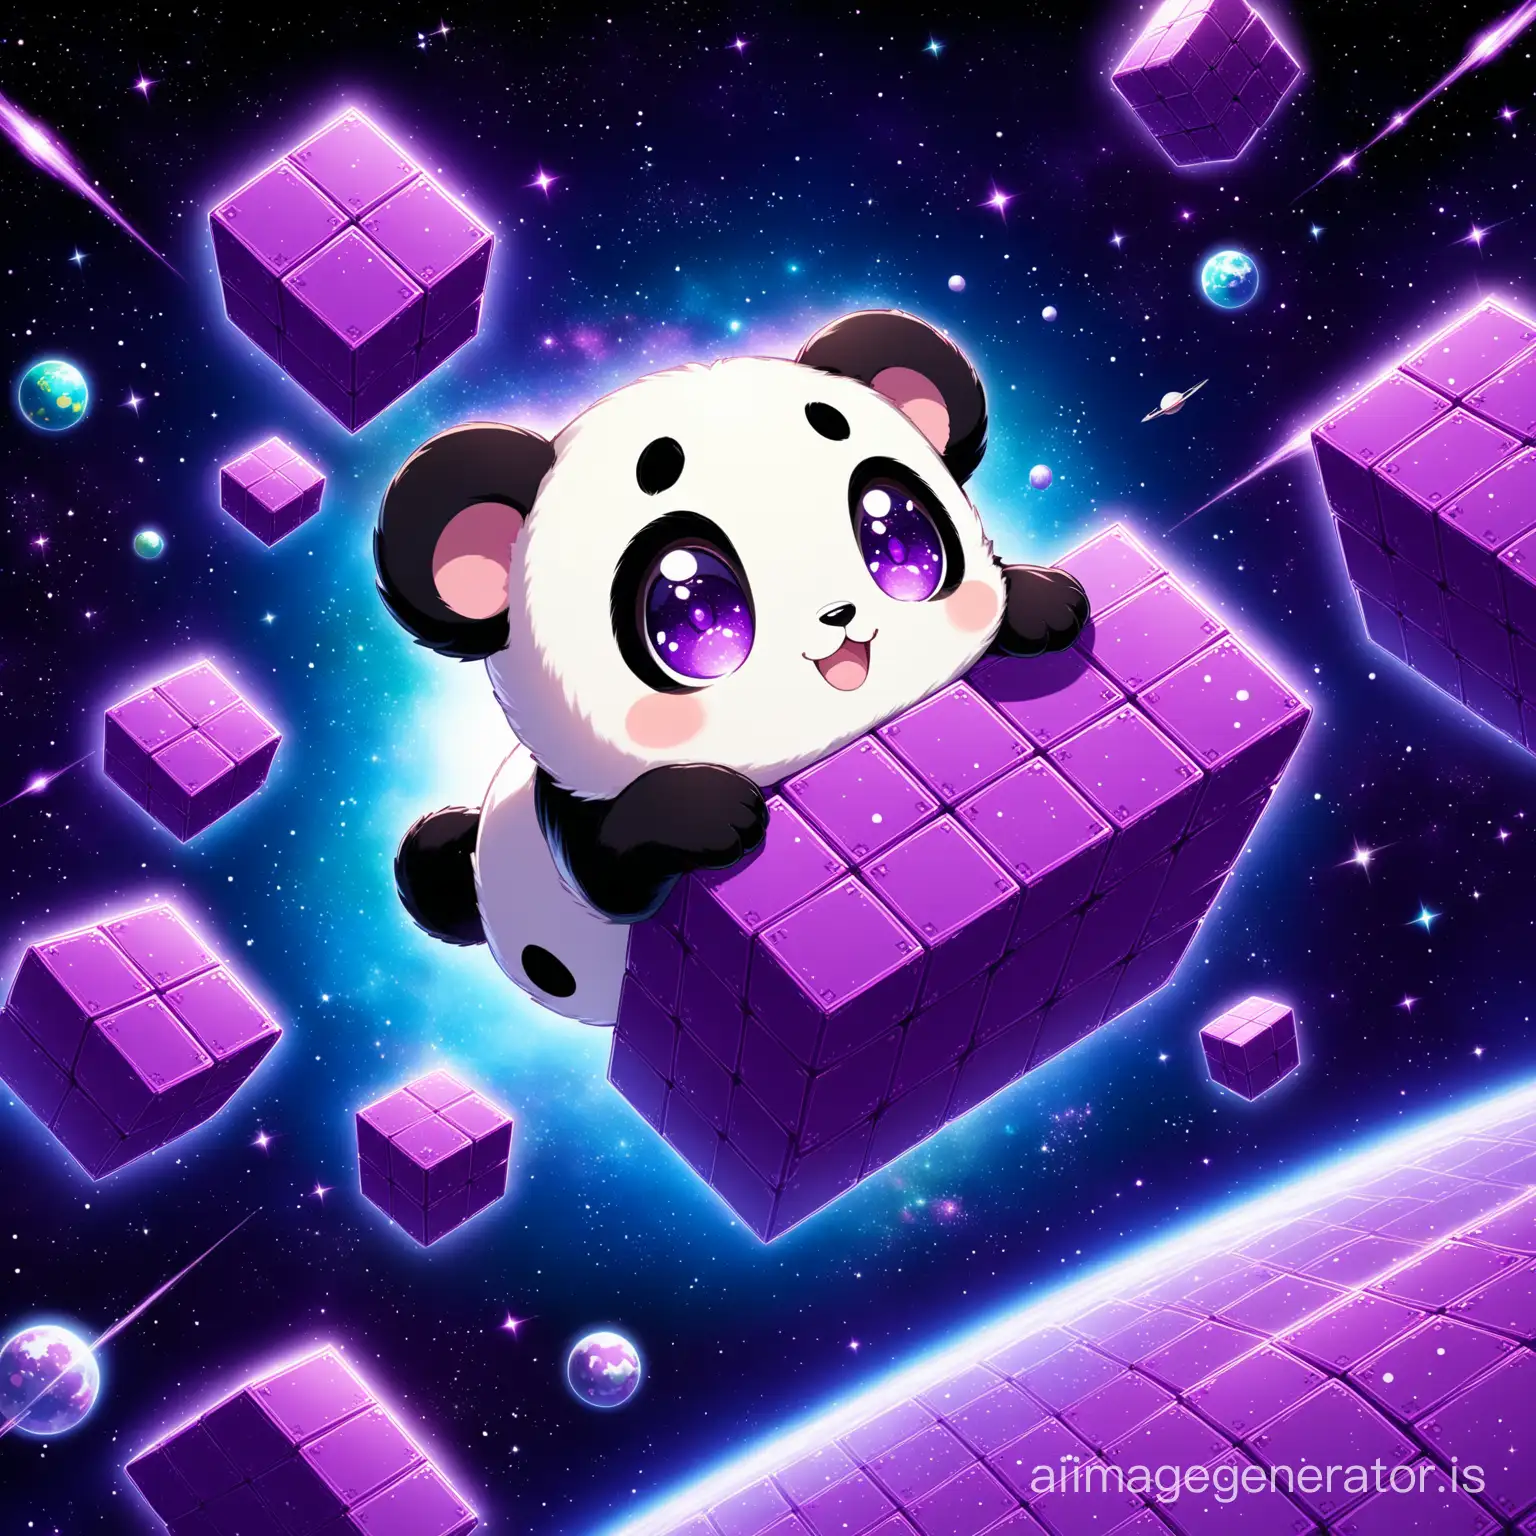 A little happy cute purple pand blocks with purple eye and smile in space with super detail and High Quality
big and purple blocks and floating are seen everywhere
Details are evident beautifully and with great precision